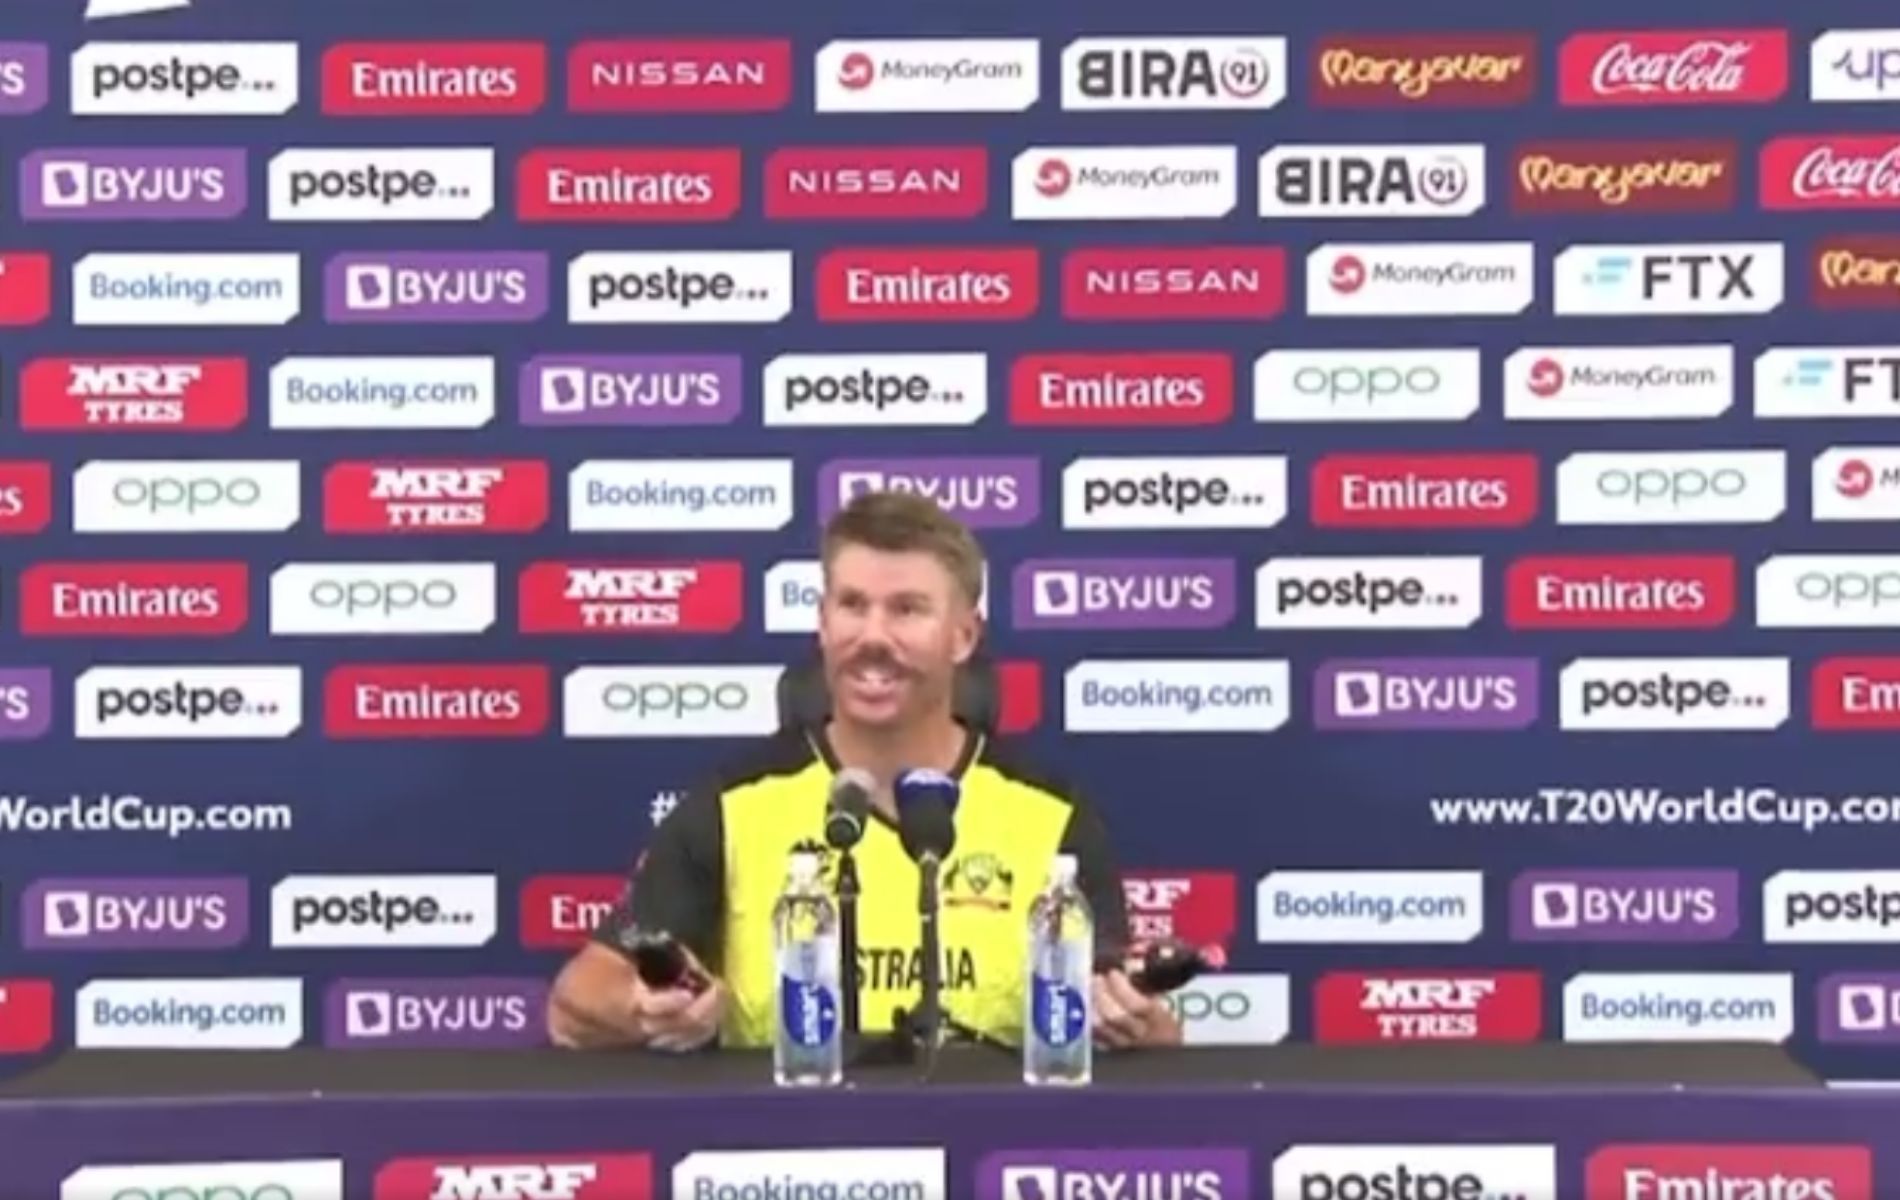 David Warner was in a humorous mood at the press conference after Australia&#039;s win over Sri Lanka.